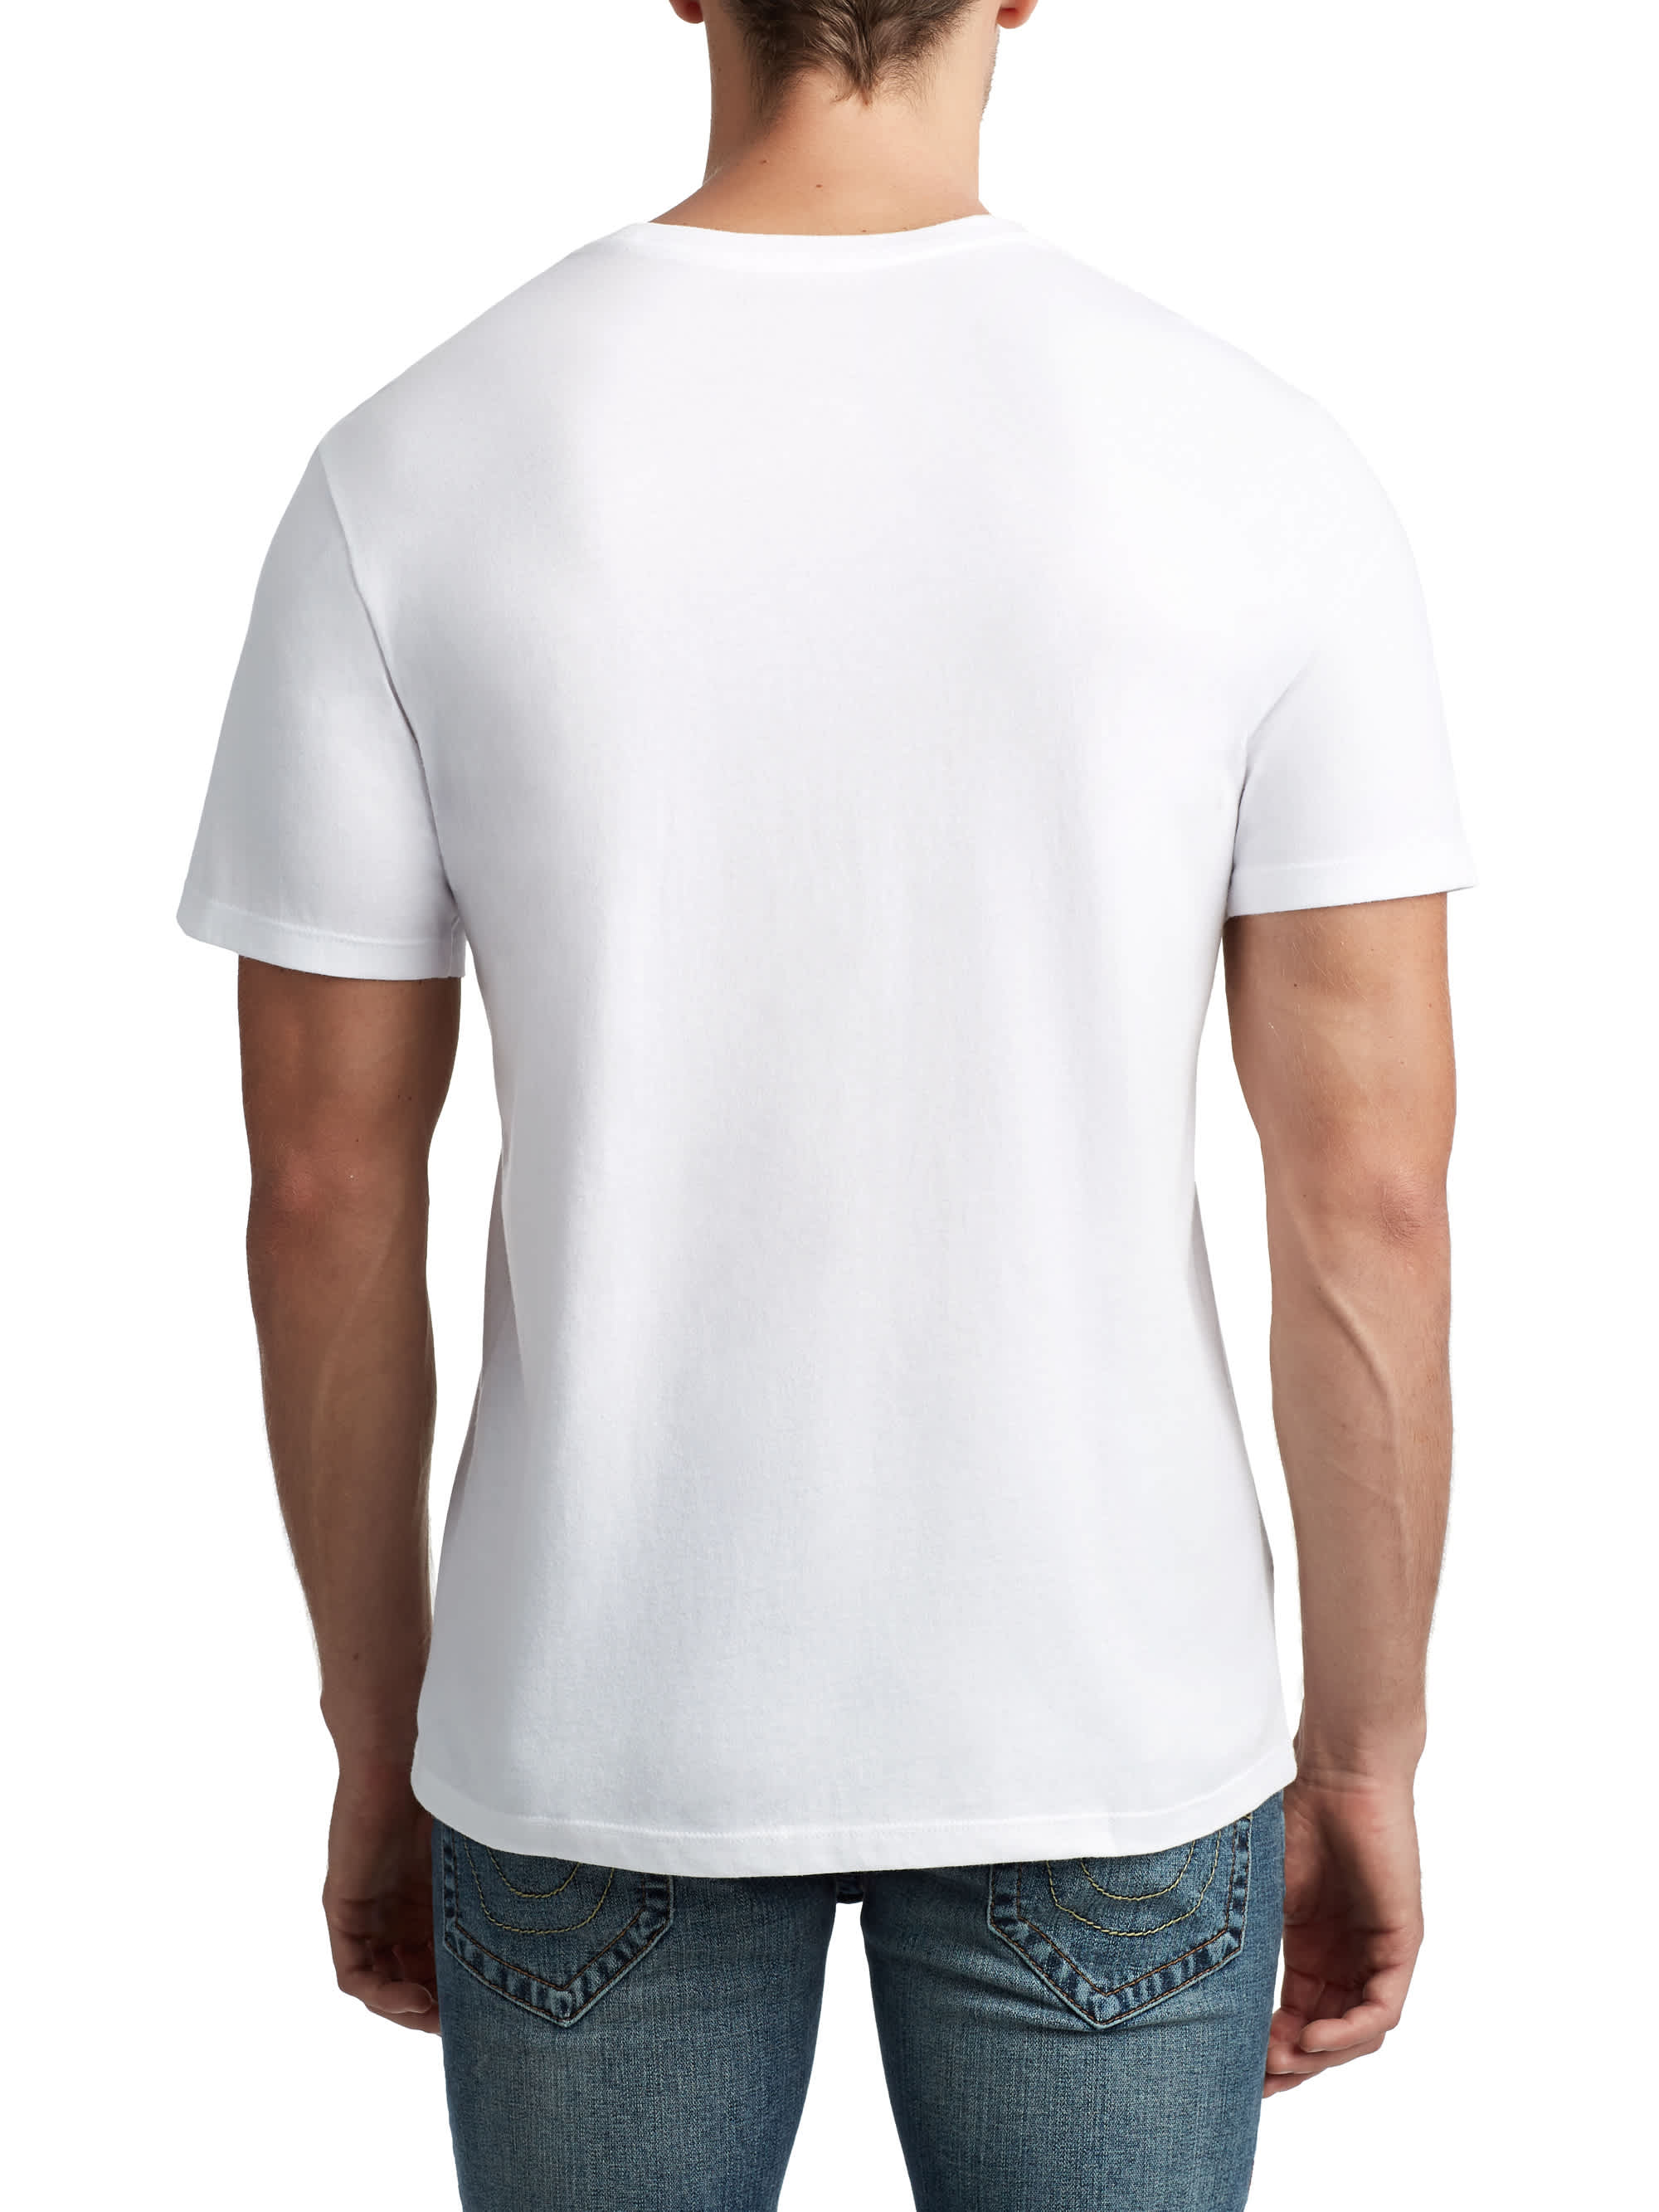 MENS FLOCKED ATHLETIC GRAPHIC TEE